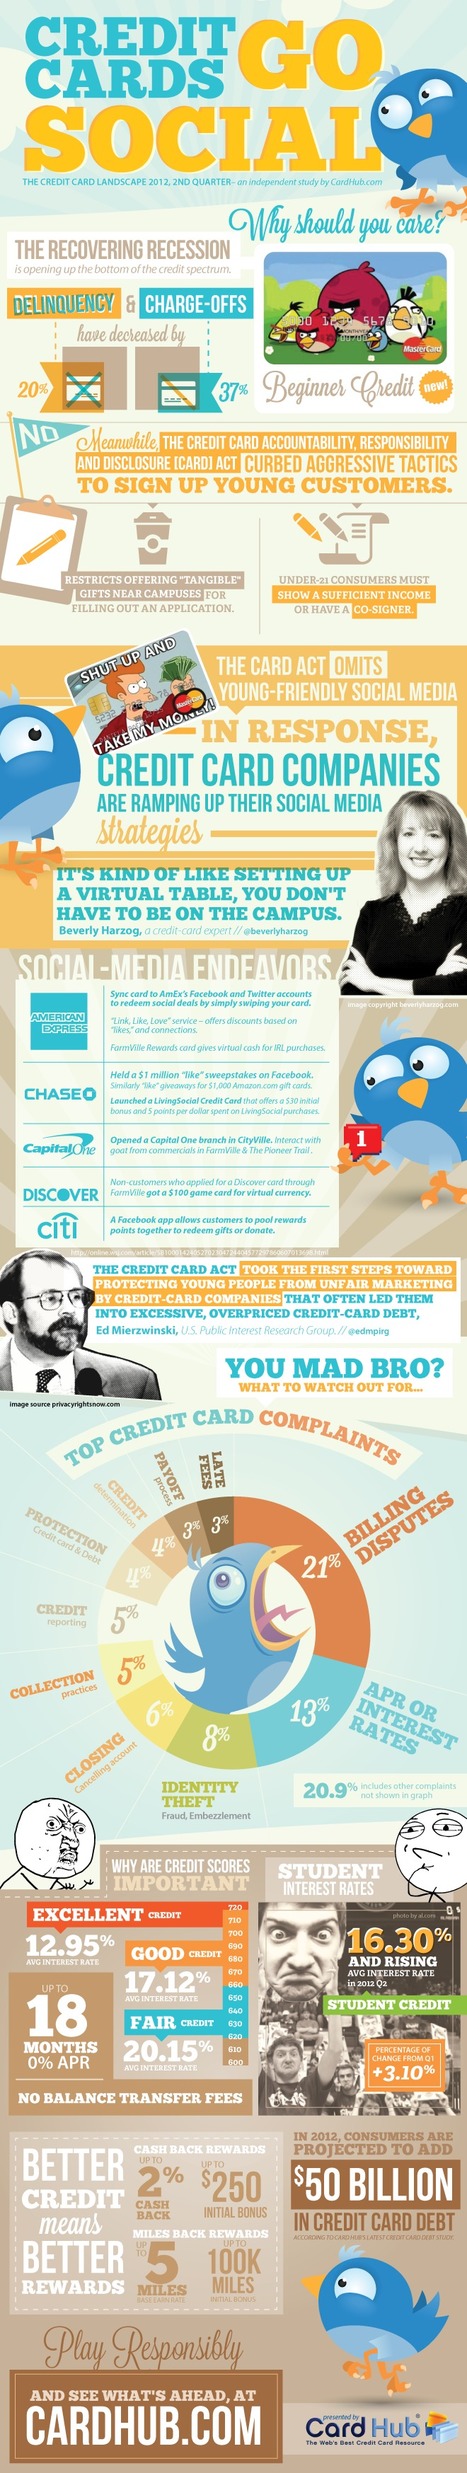 Credit Cards Go Social and Why You Should Care [Infographic] | Social Marketing Revolution | Scoop.it